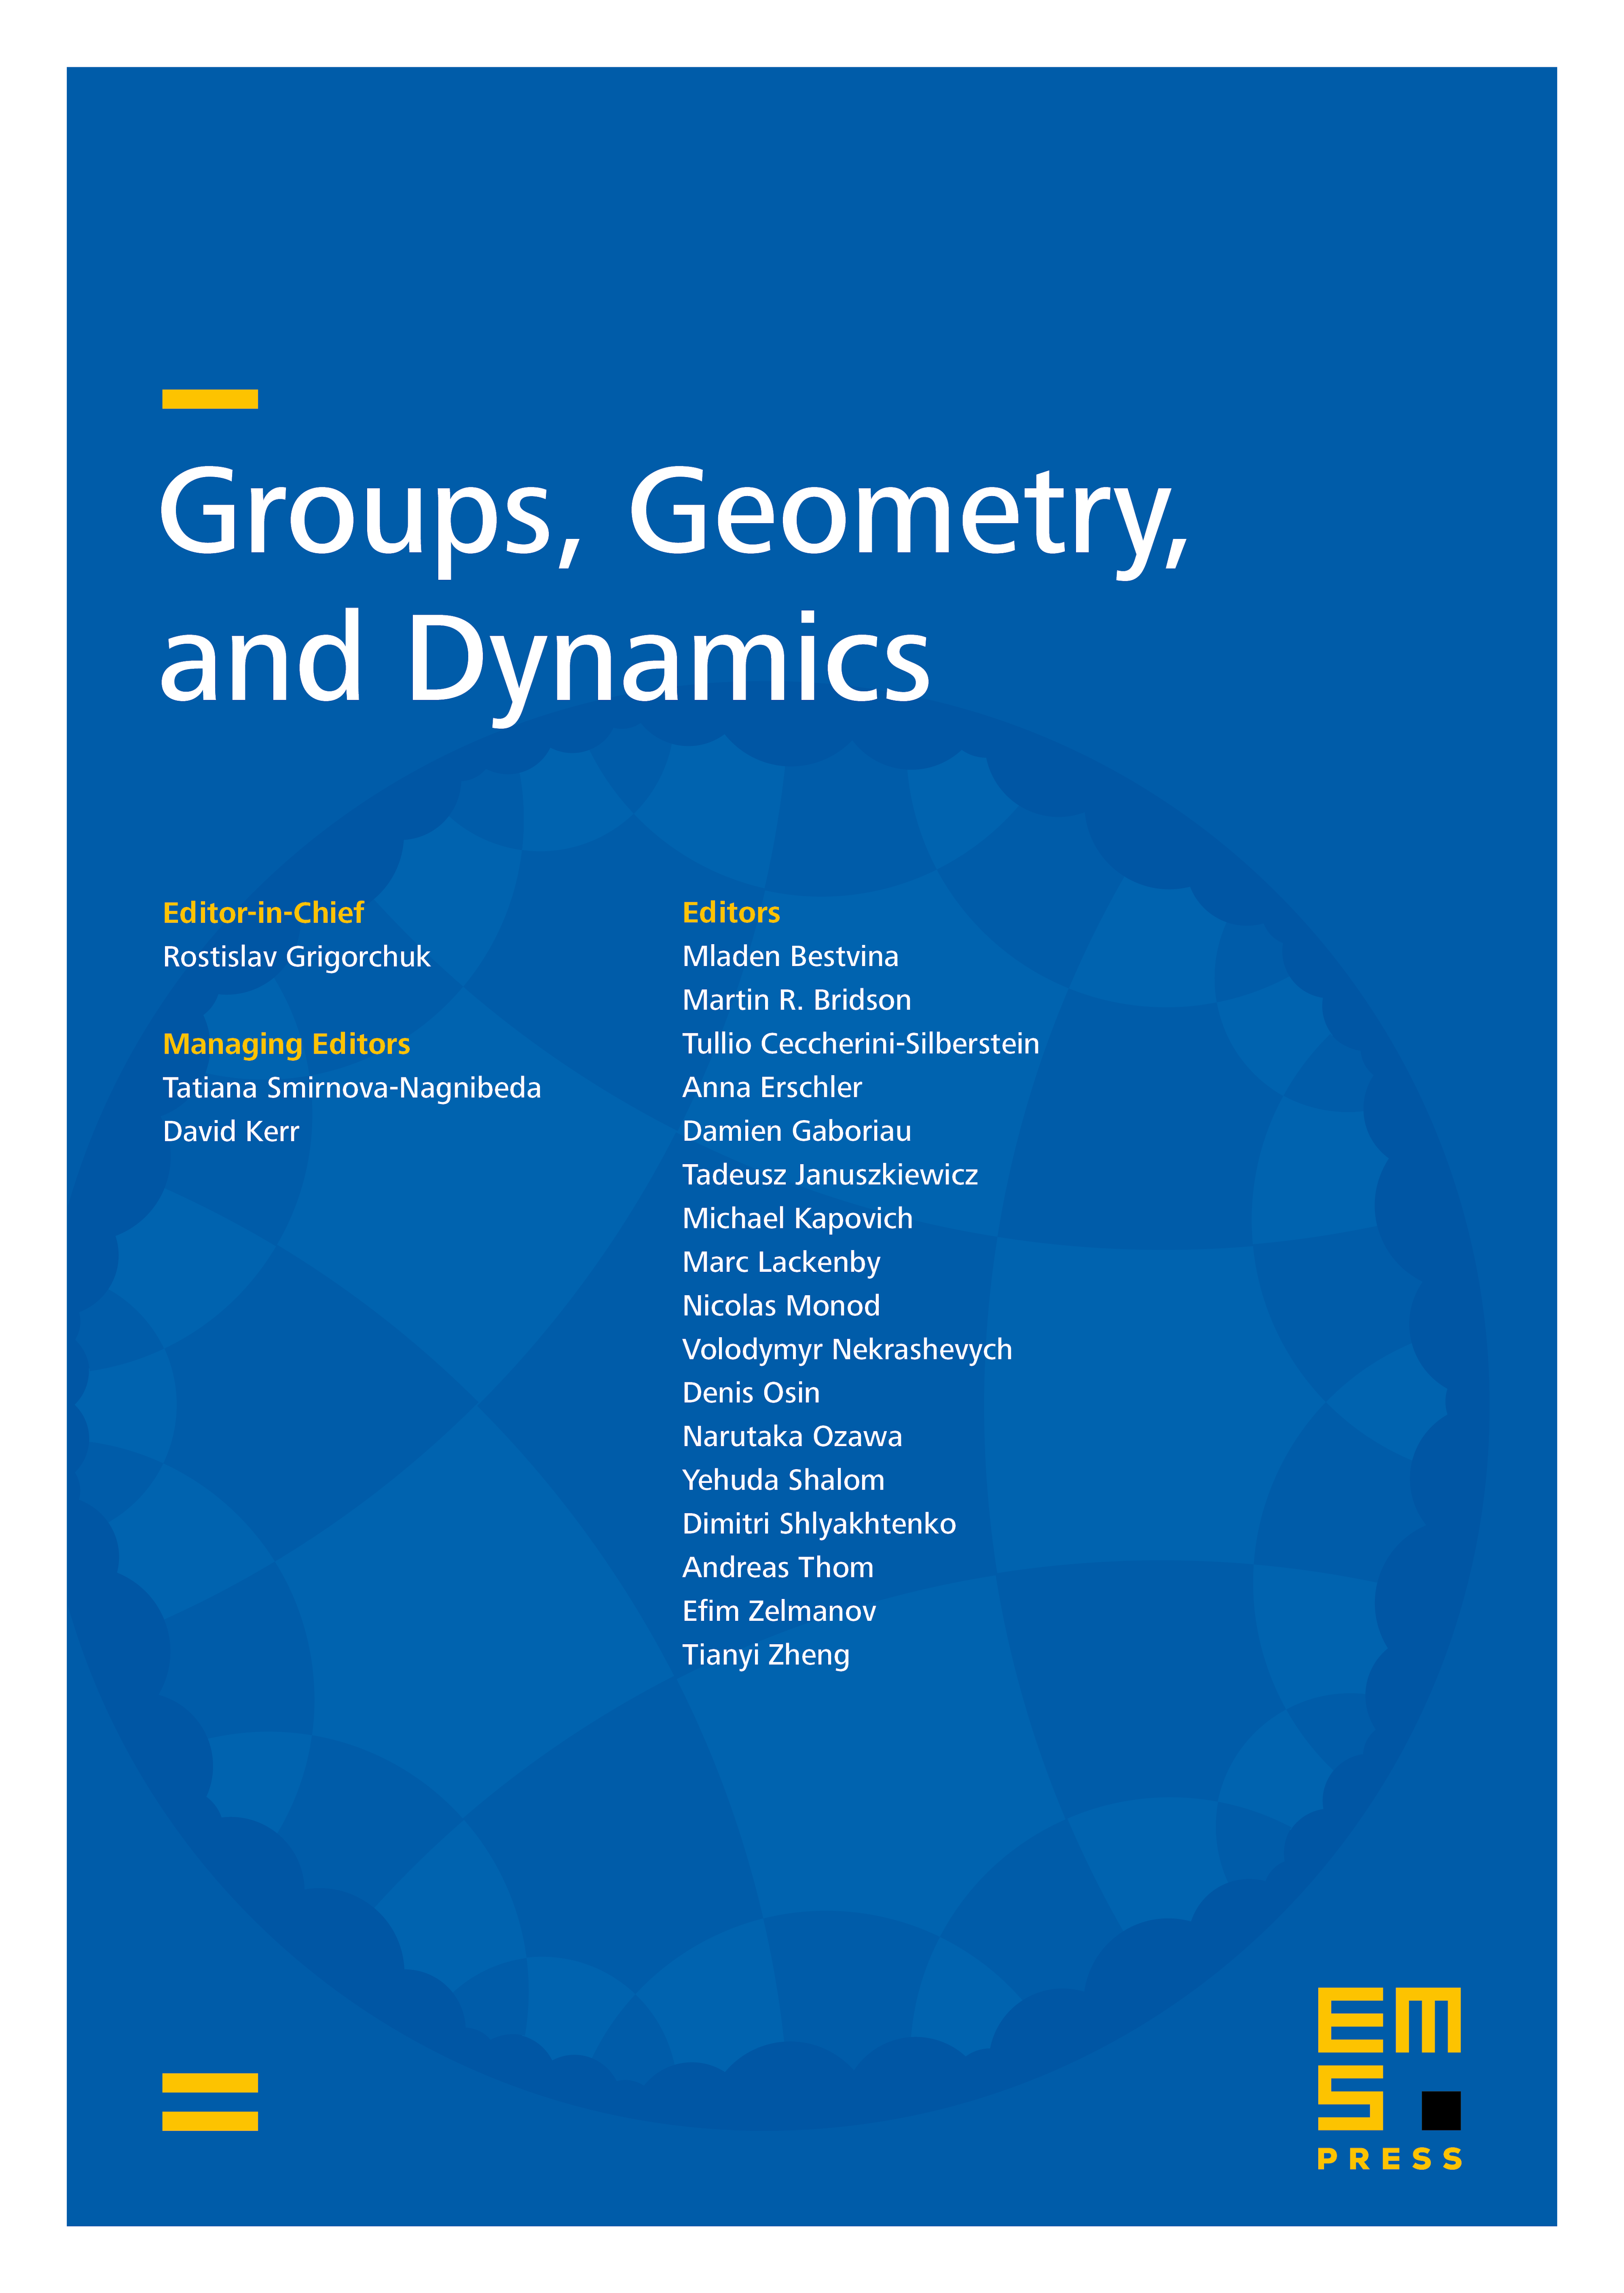 Combinatorial growth in the modular group cover